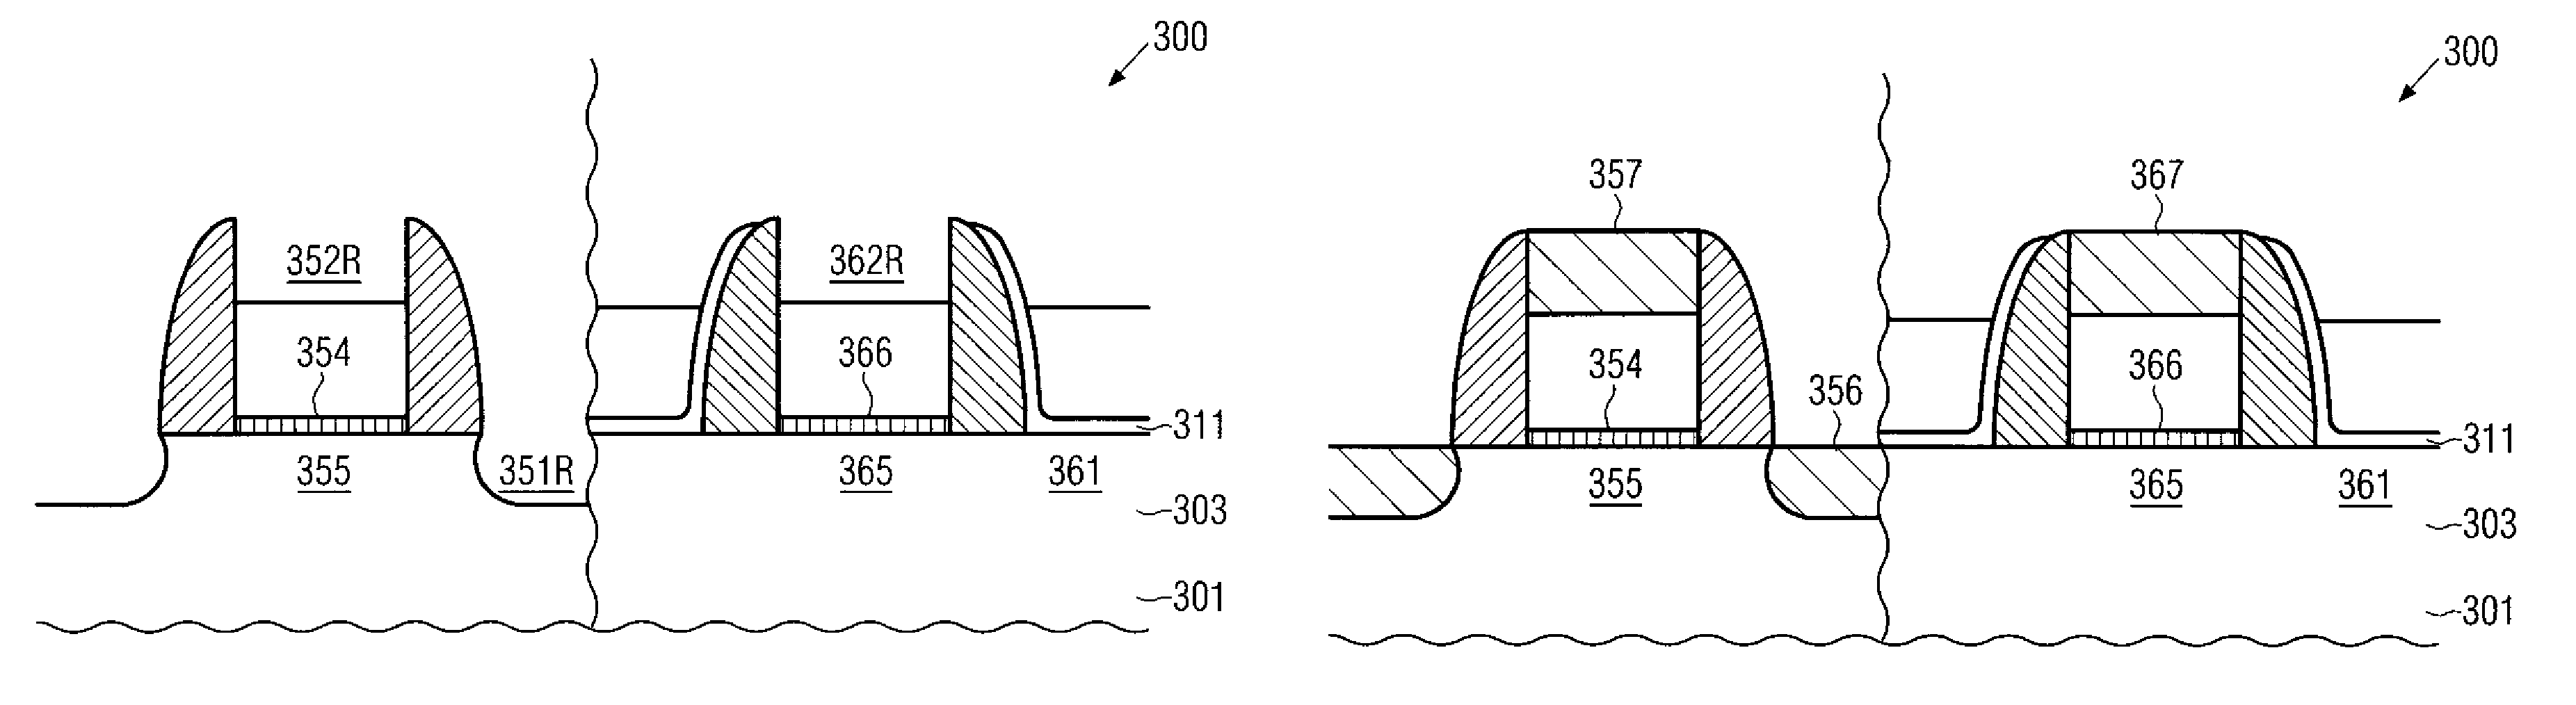 Transistor having a channel with biaxial strain induced by silicon/germanium in the gate electrode